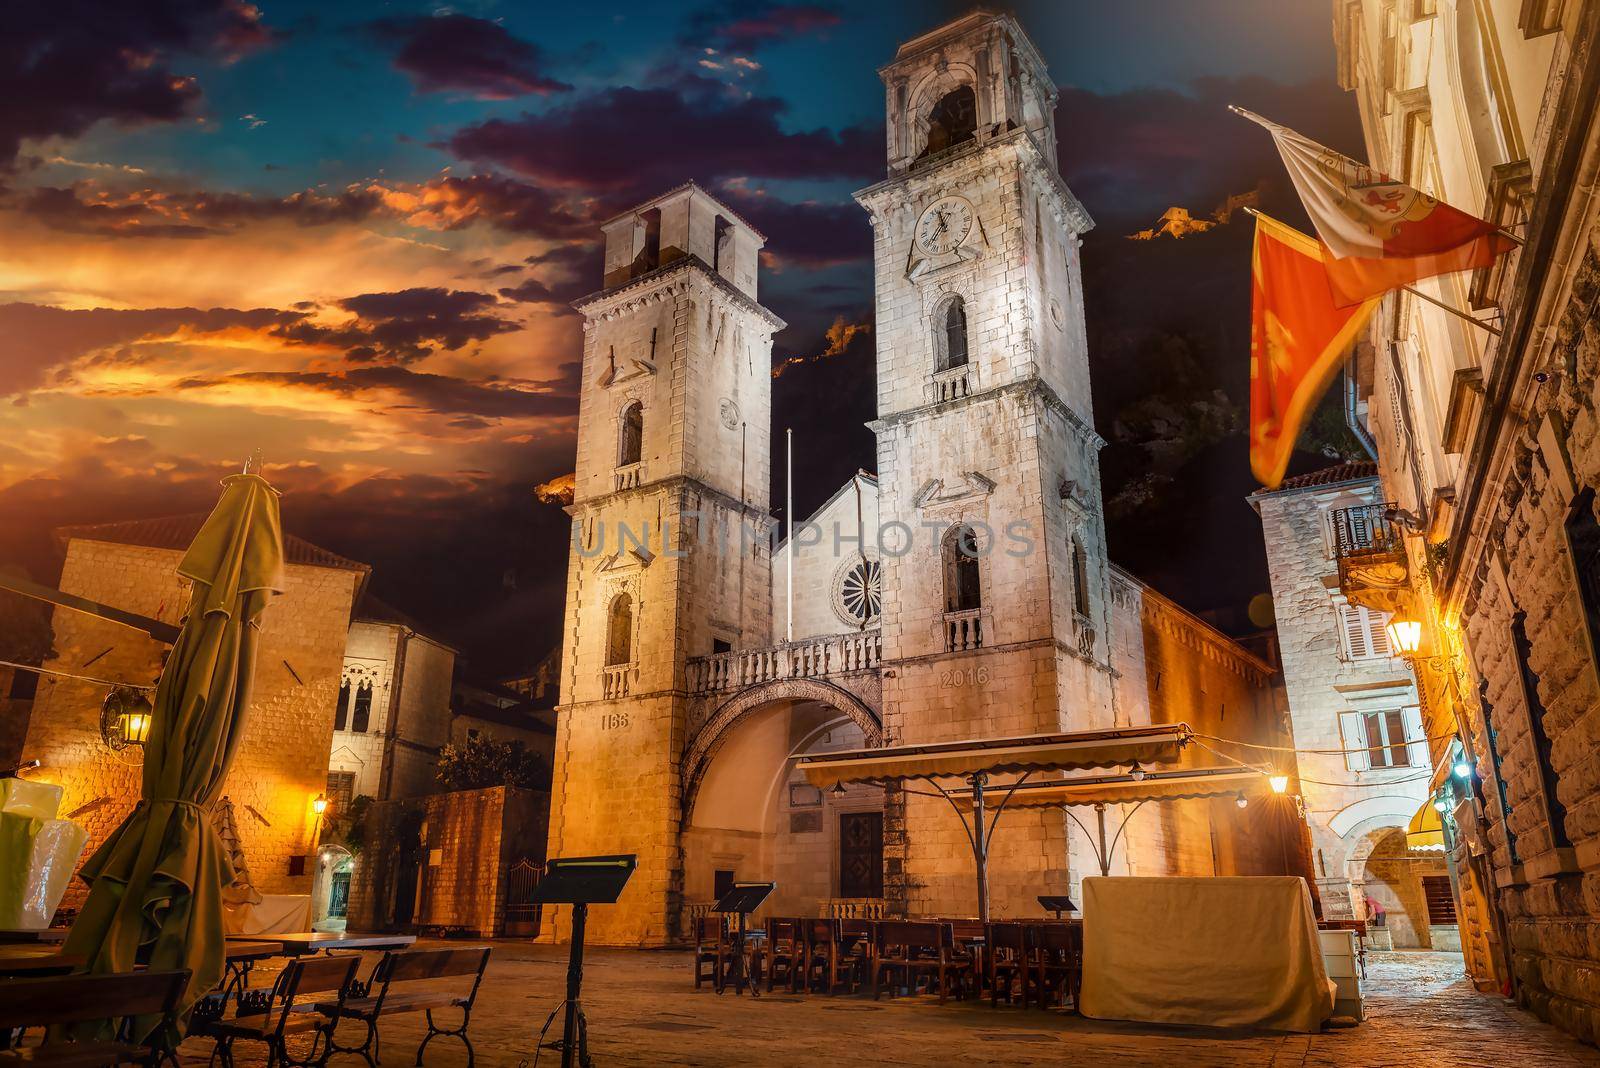 Saint Tryphon Church in the Old Town of Kotor at night